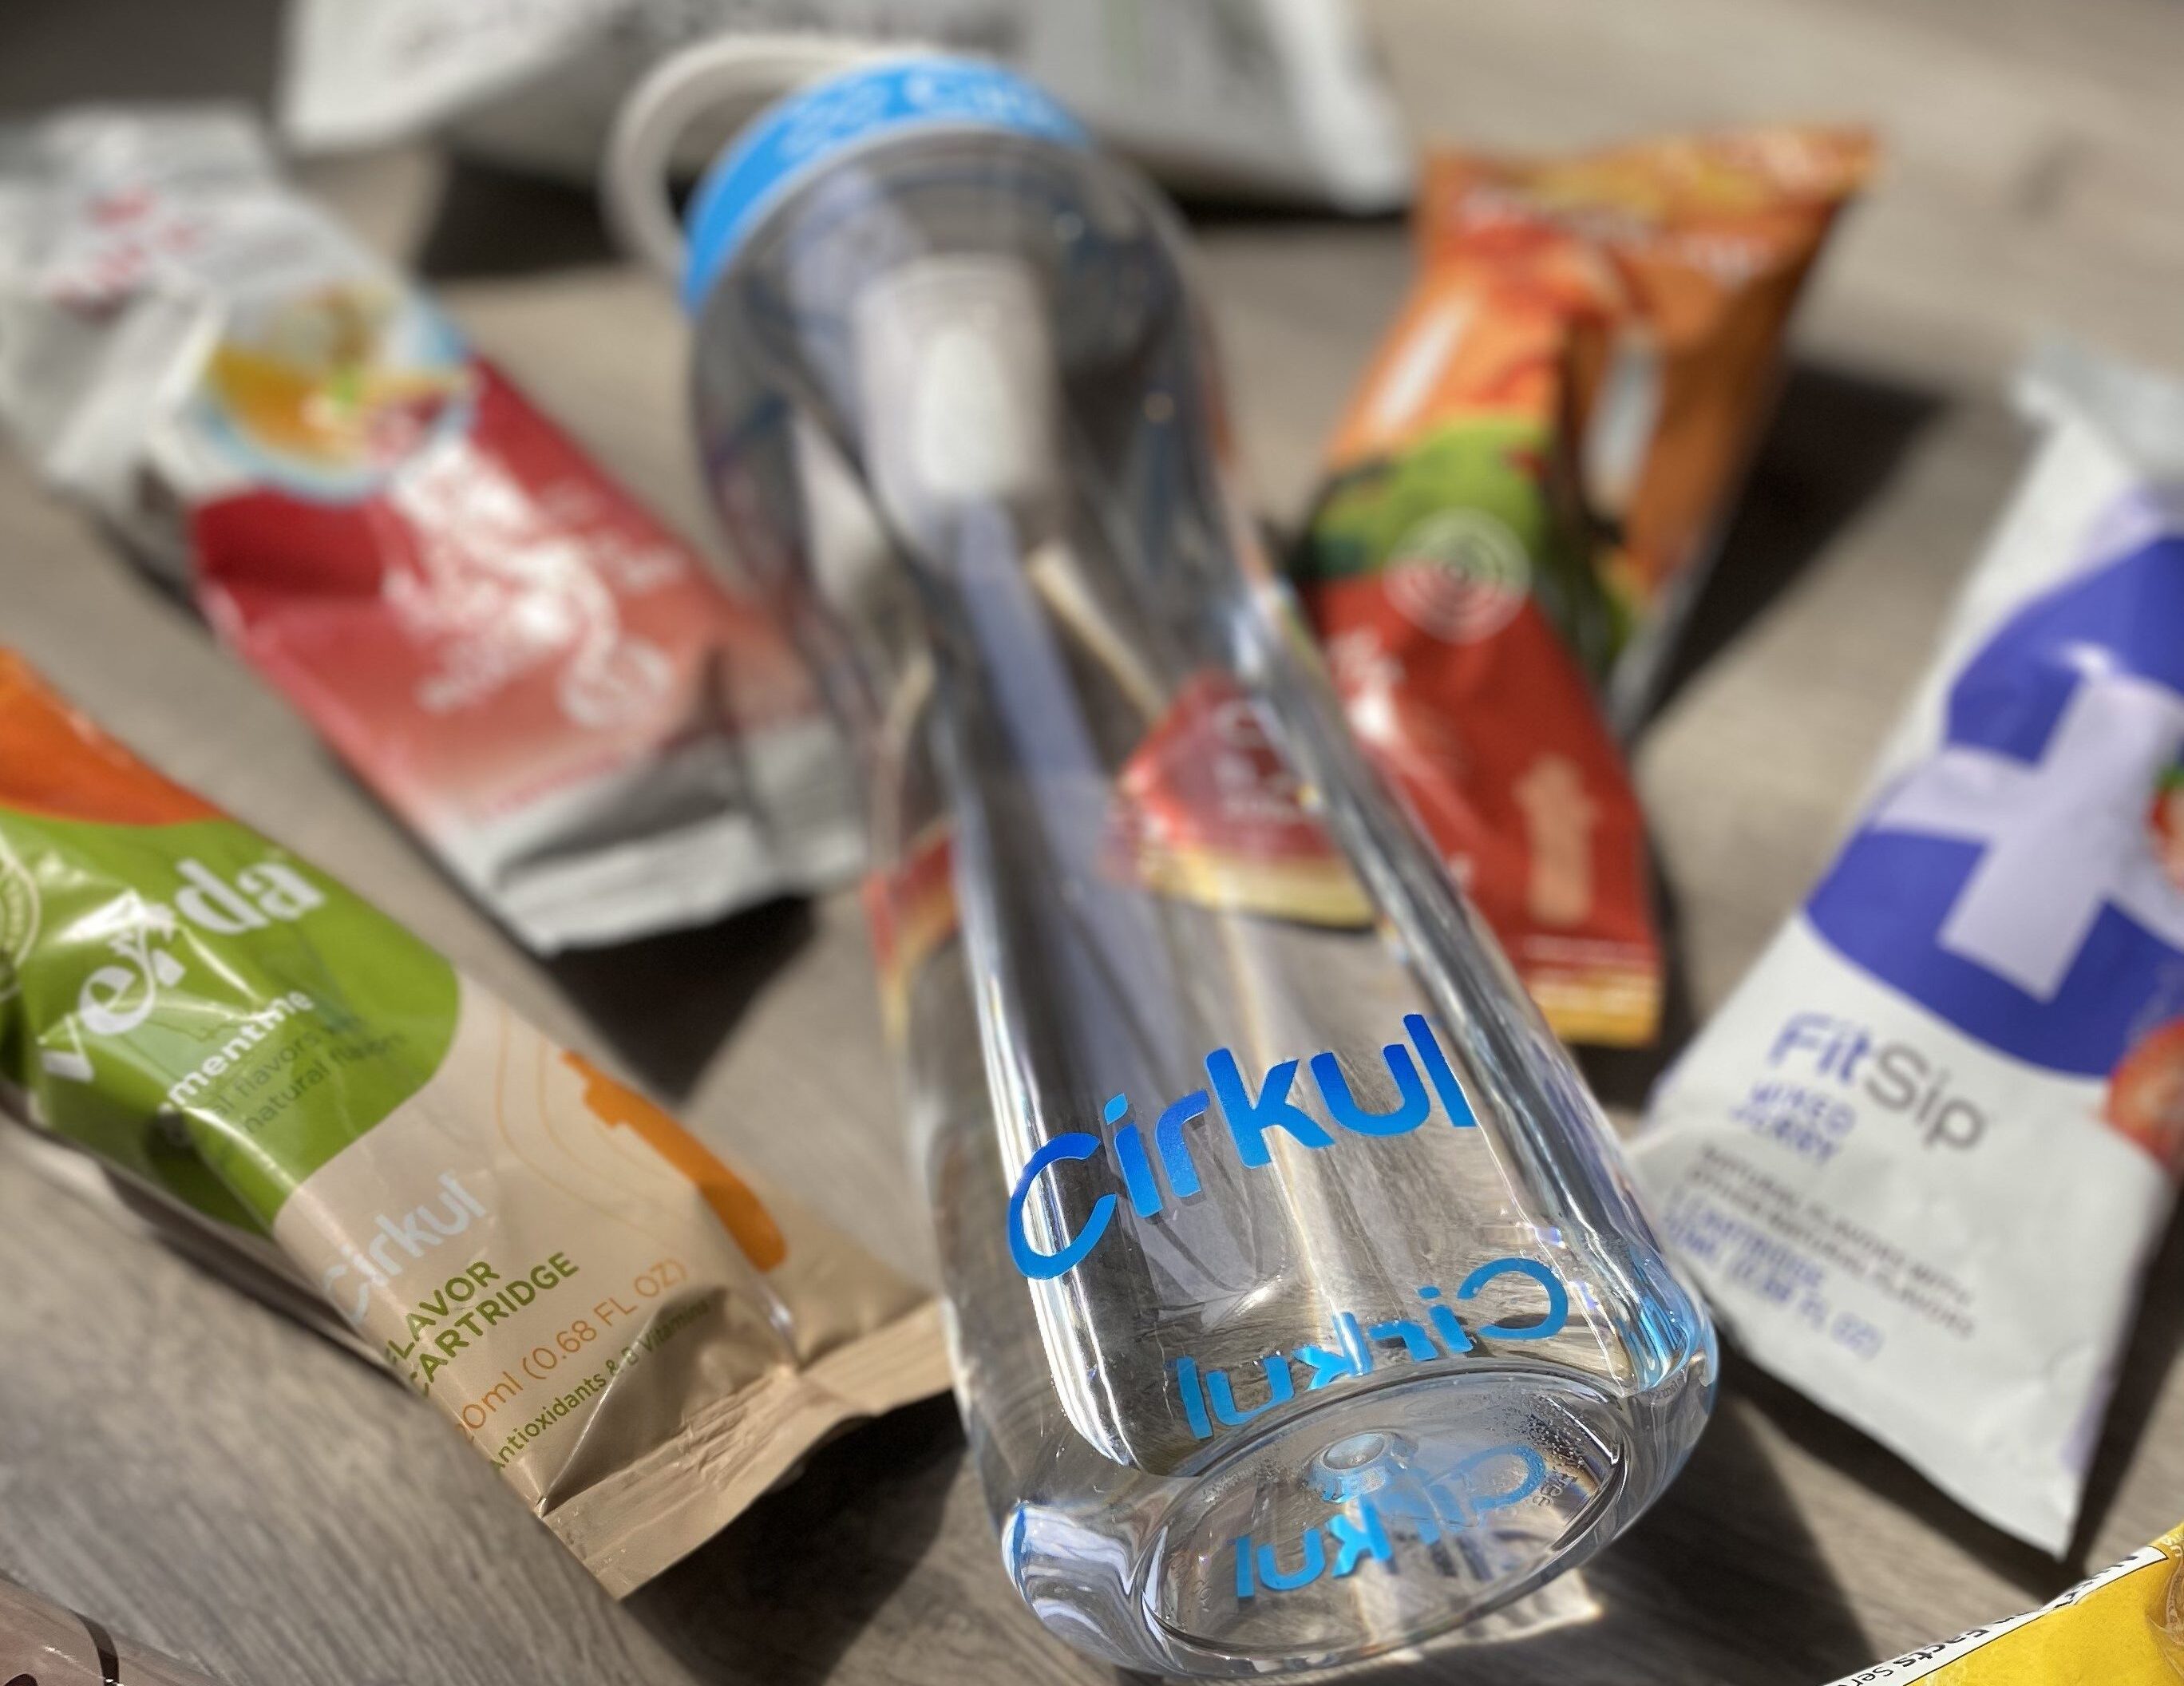 Cirkul Water Bottle review - why so many can't put down these water bottles.  